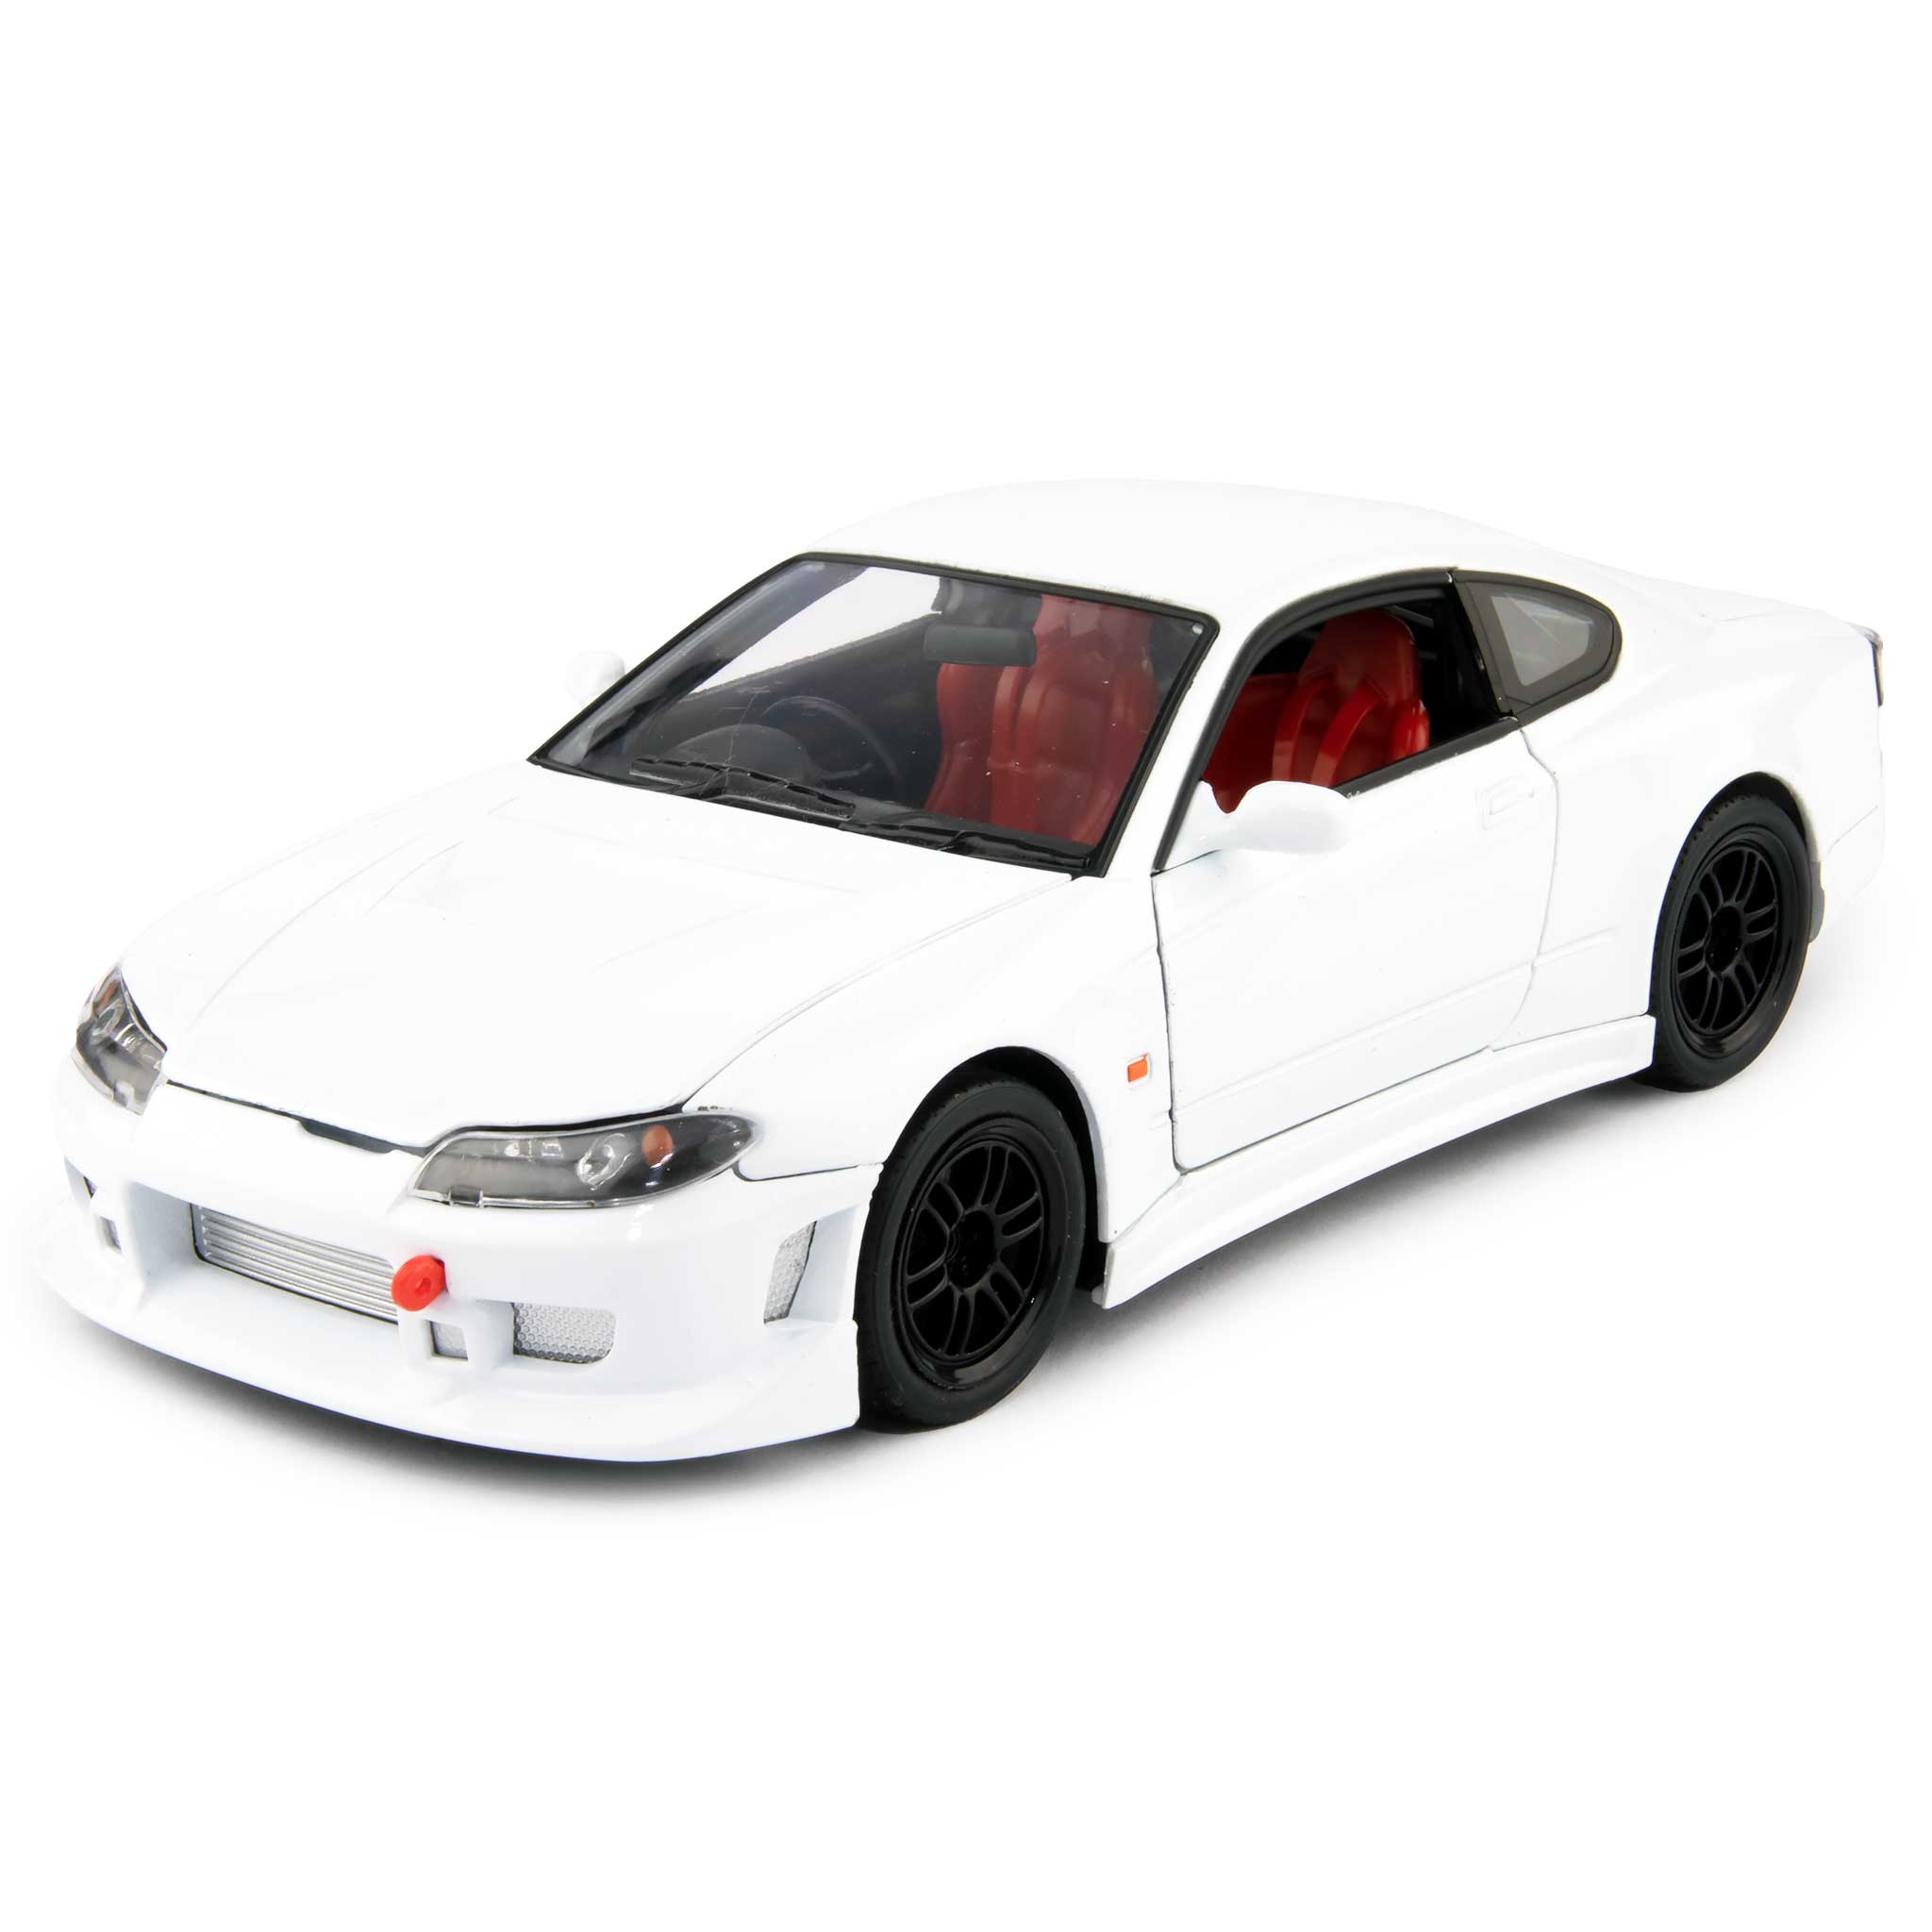 Nissan Silvia S-15 RS-R Diecast Model Car white - 1:24 Scale-Welly-Diecast Model Centre